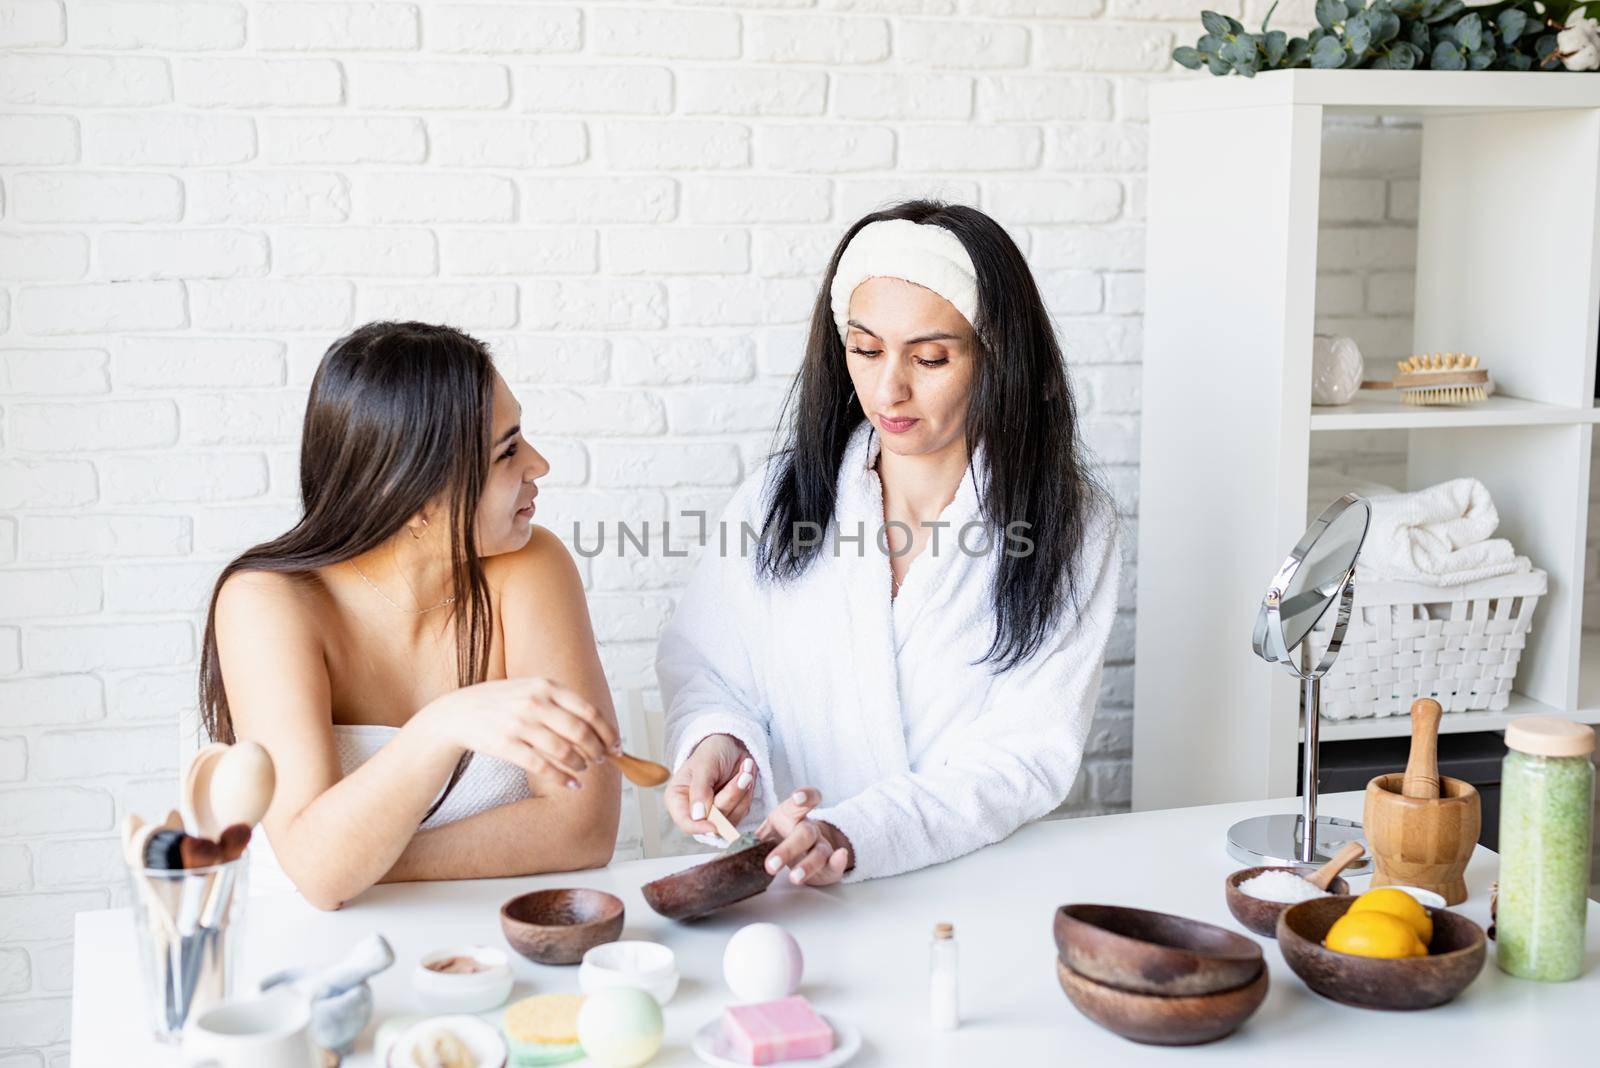 Spa and wellness concept. Self care. two beautiful women making facial mask doing spa procedures